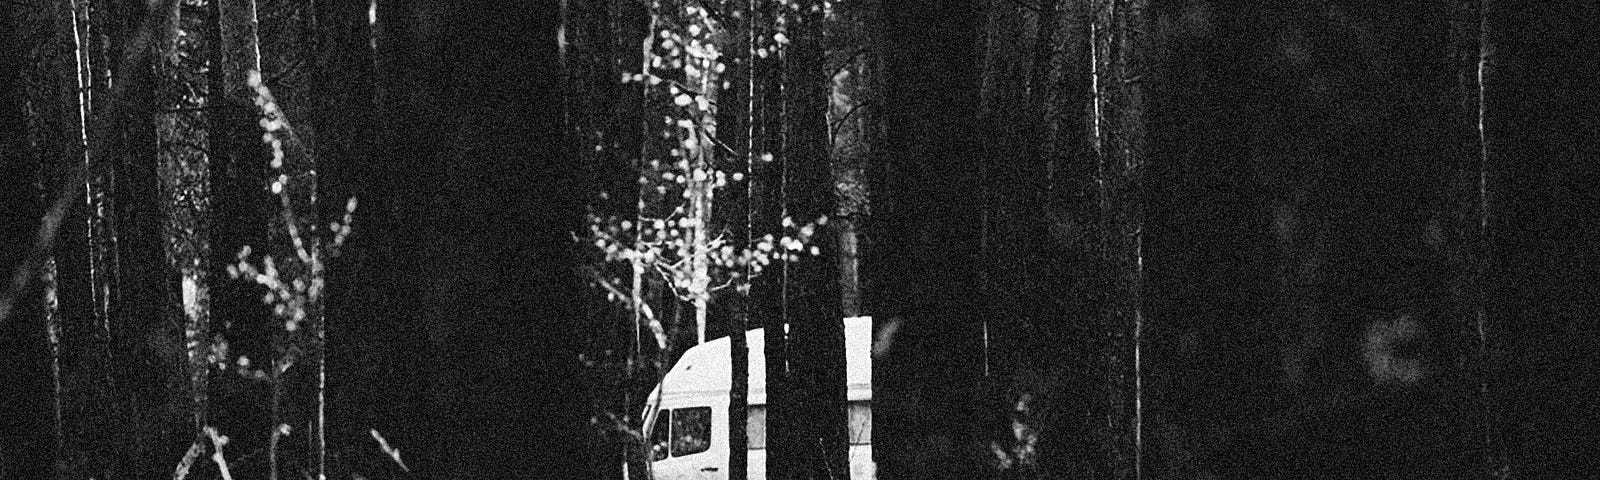 Black and white photo of van in woods.